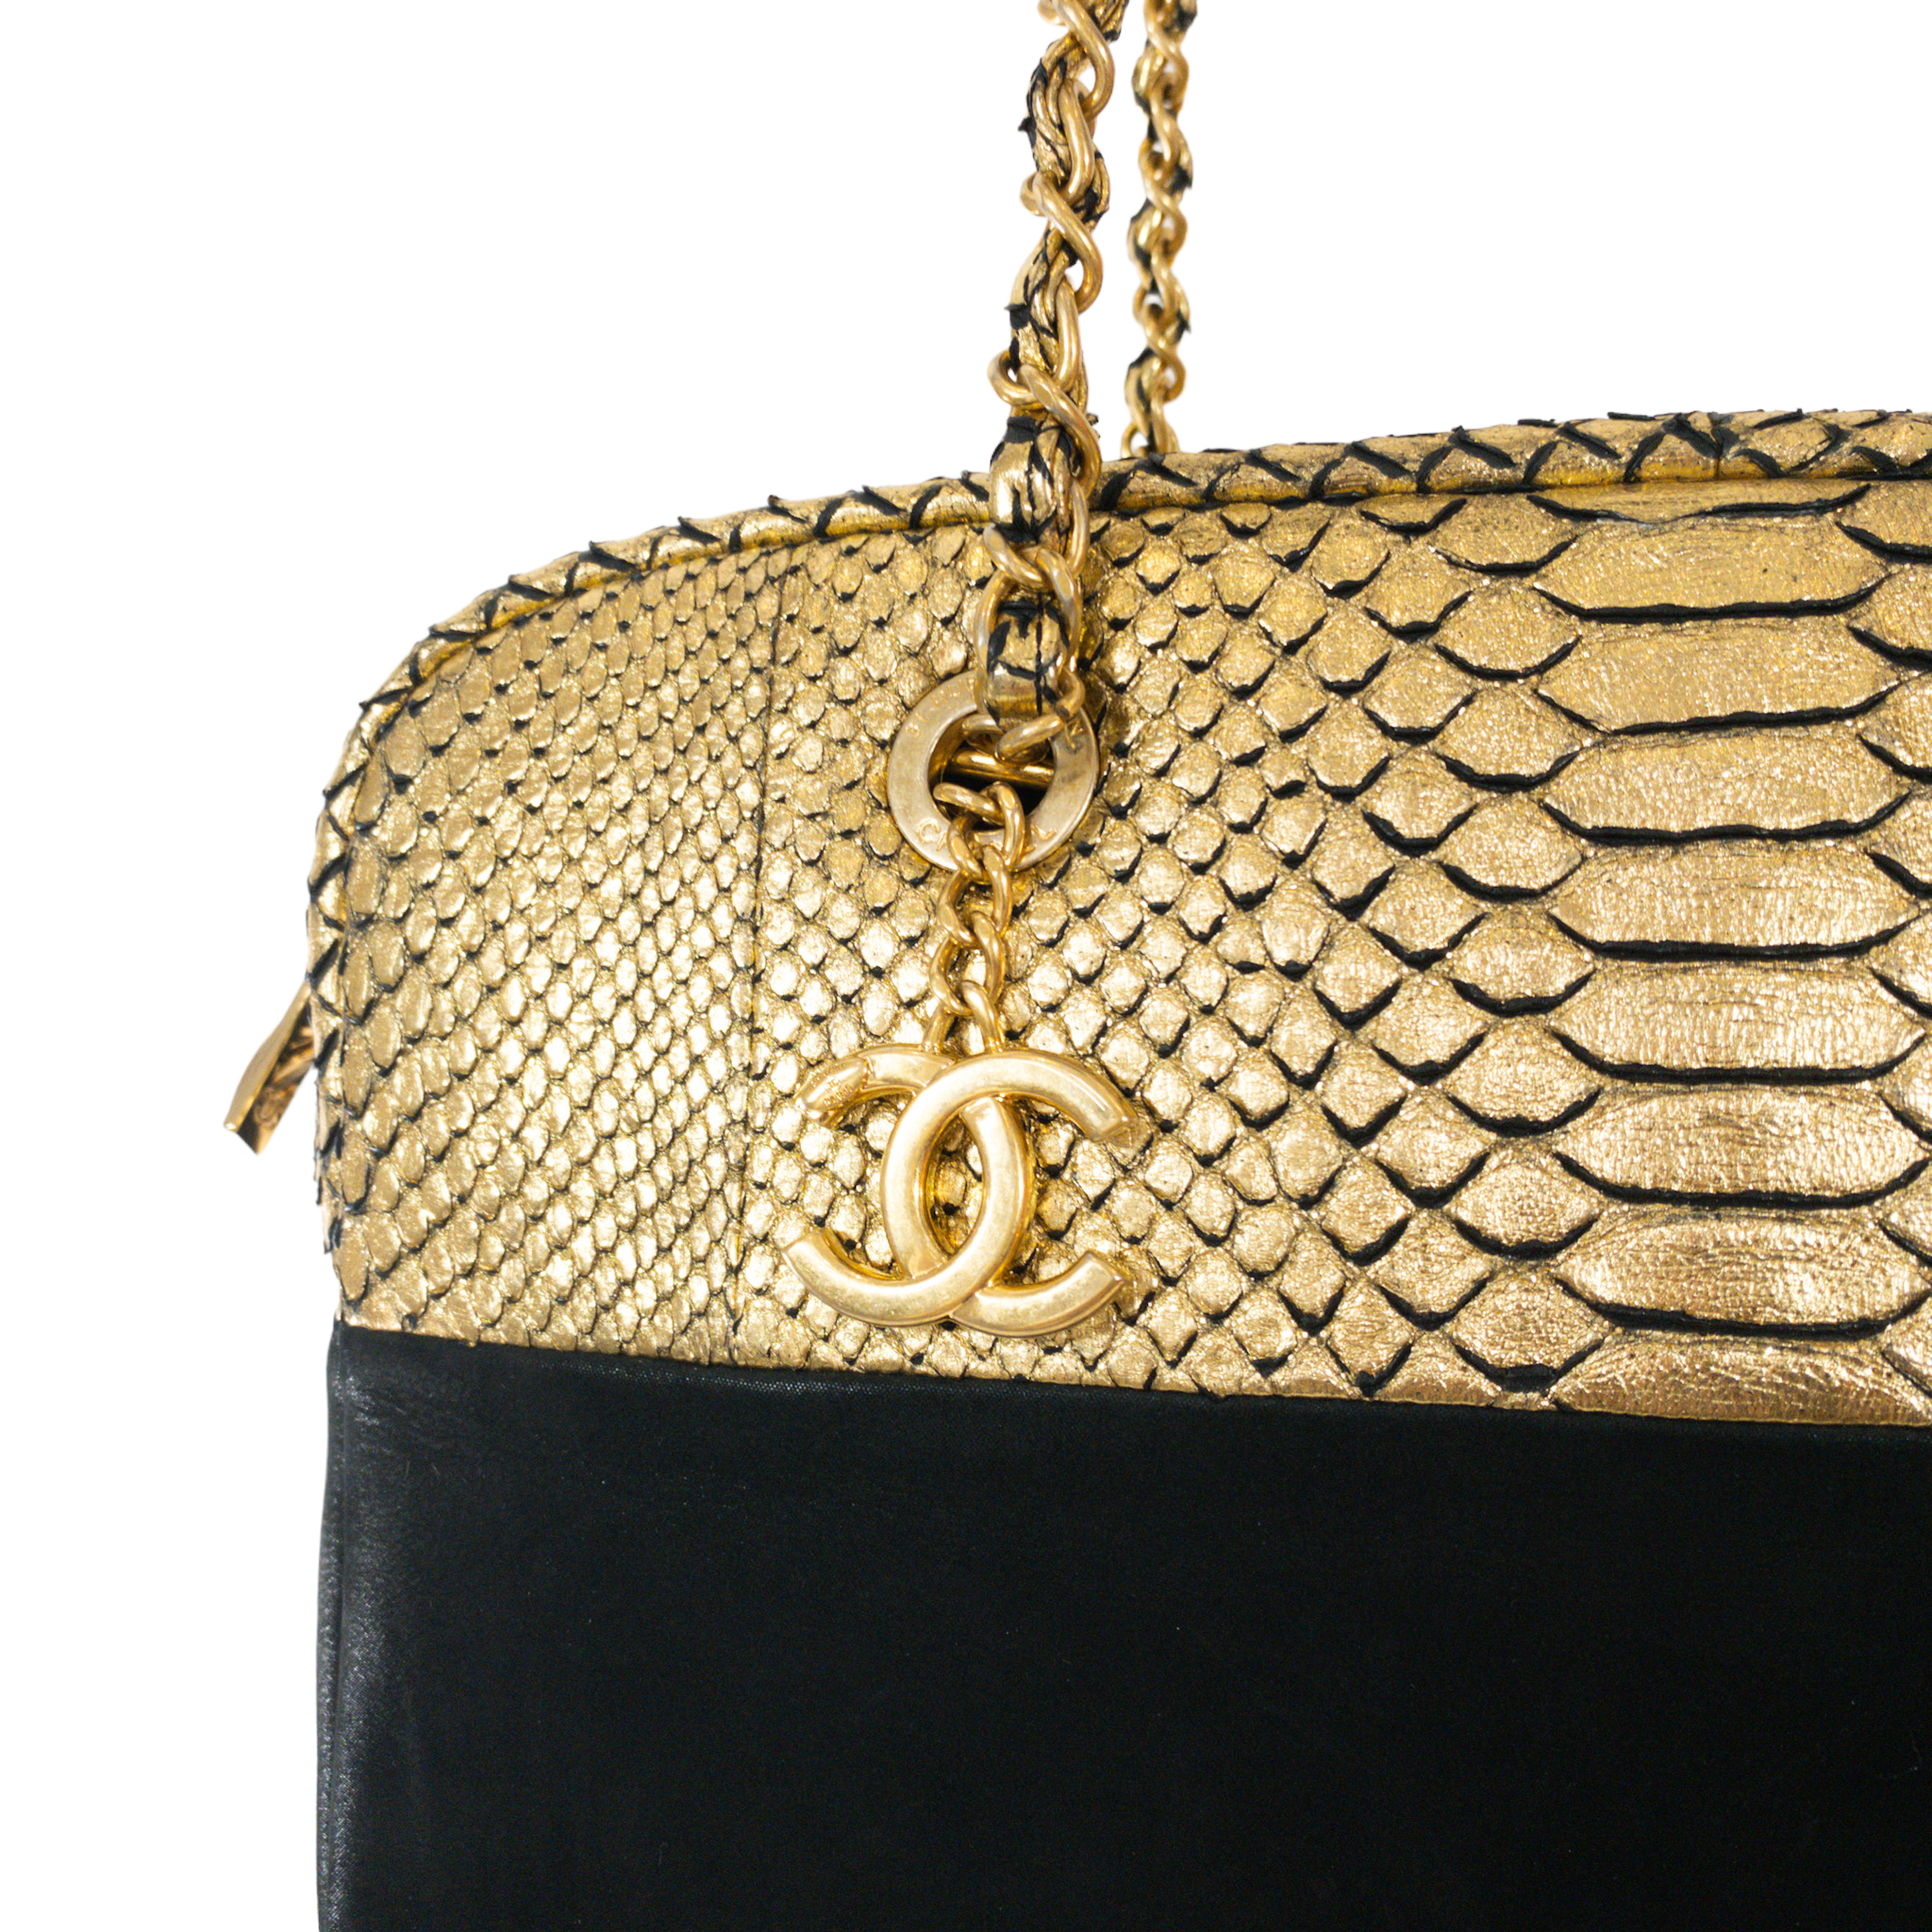 Chanel Python Tote - 12 For Sale on 1stDibs  chanel python tote bag, chanel  snake tote, chanel snake bag